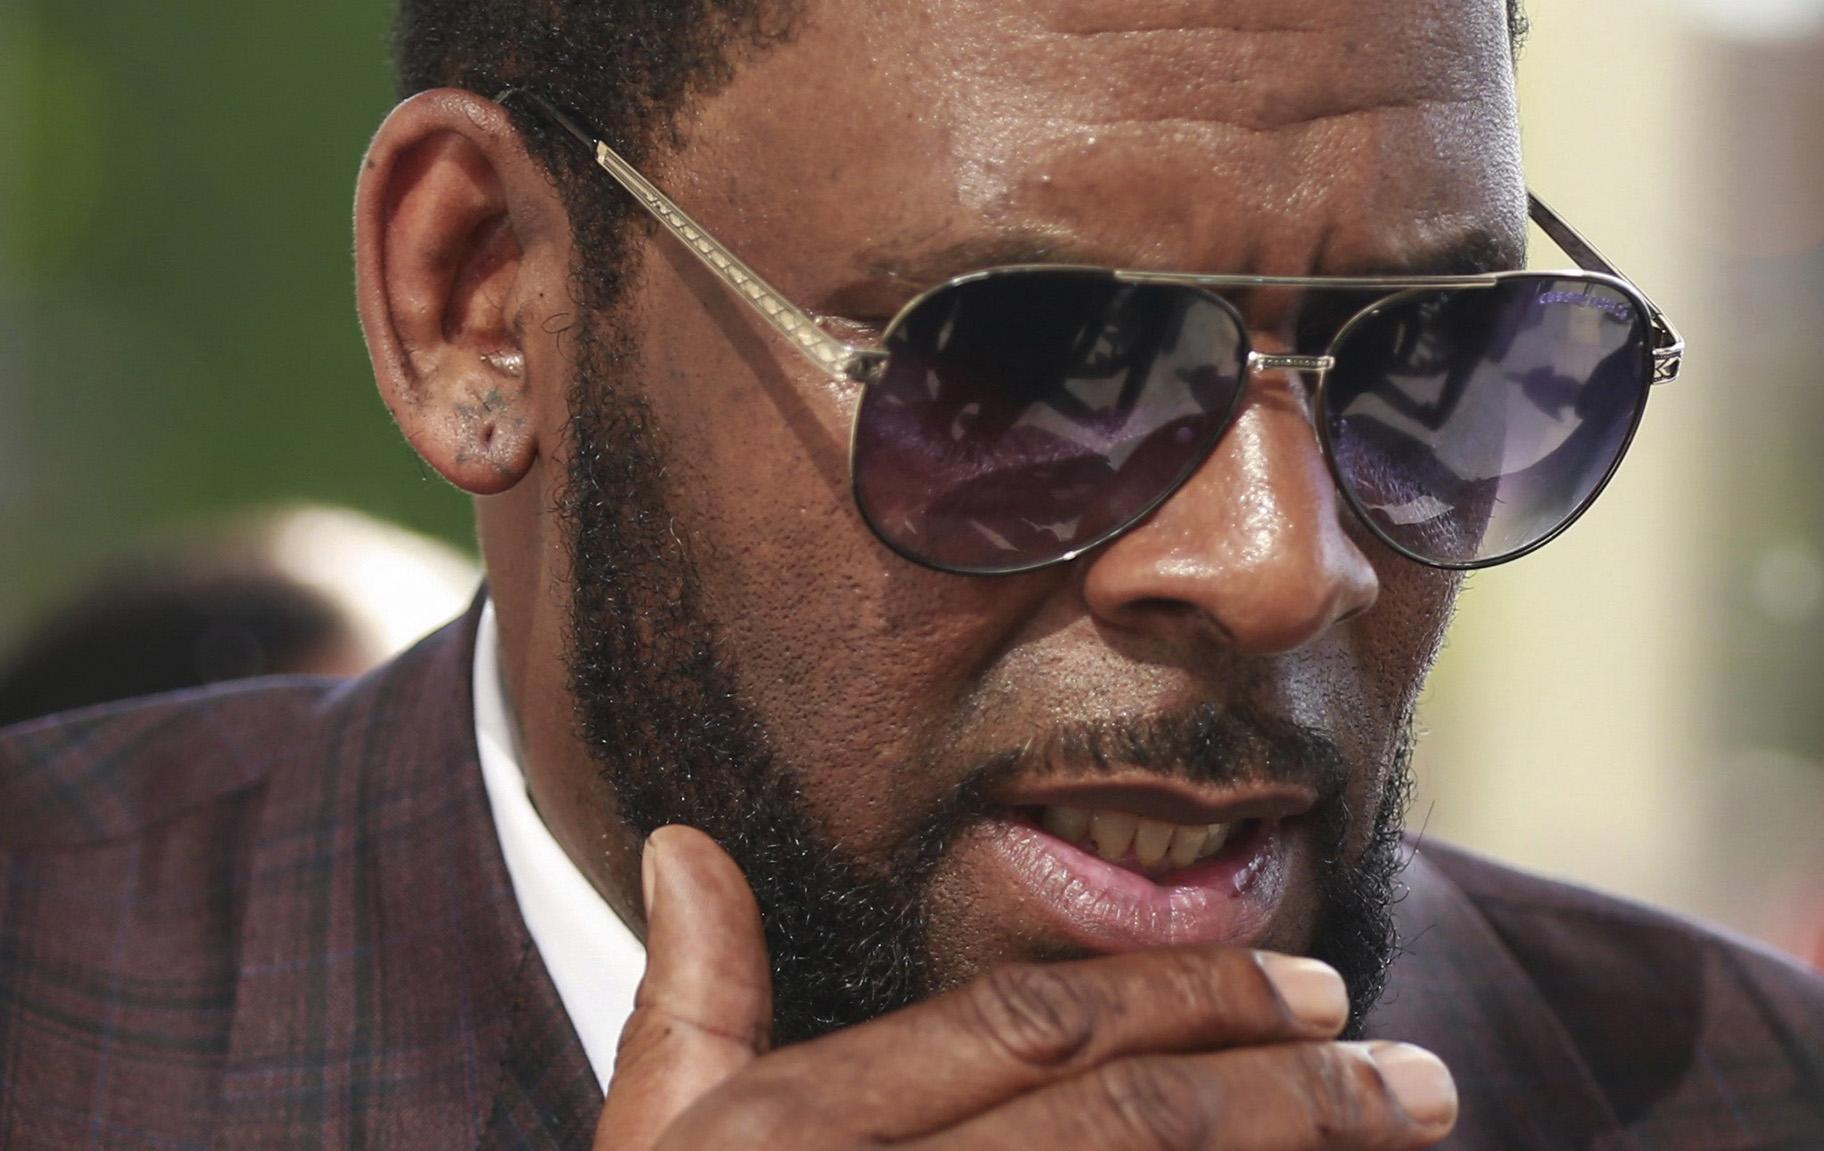 This photo from Wednesday, June 26, 2019, shows R&B singer R. Kelly arriving at the Leighton Criminal Court in Chicago for arraignment on sex-related charges. (AP Photo / Amr Alfiky, File)